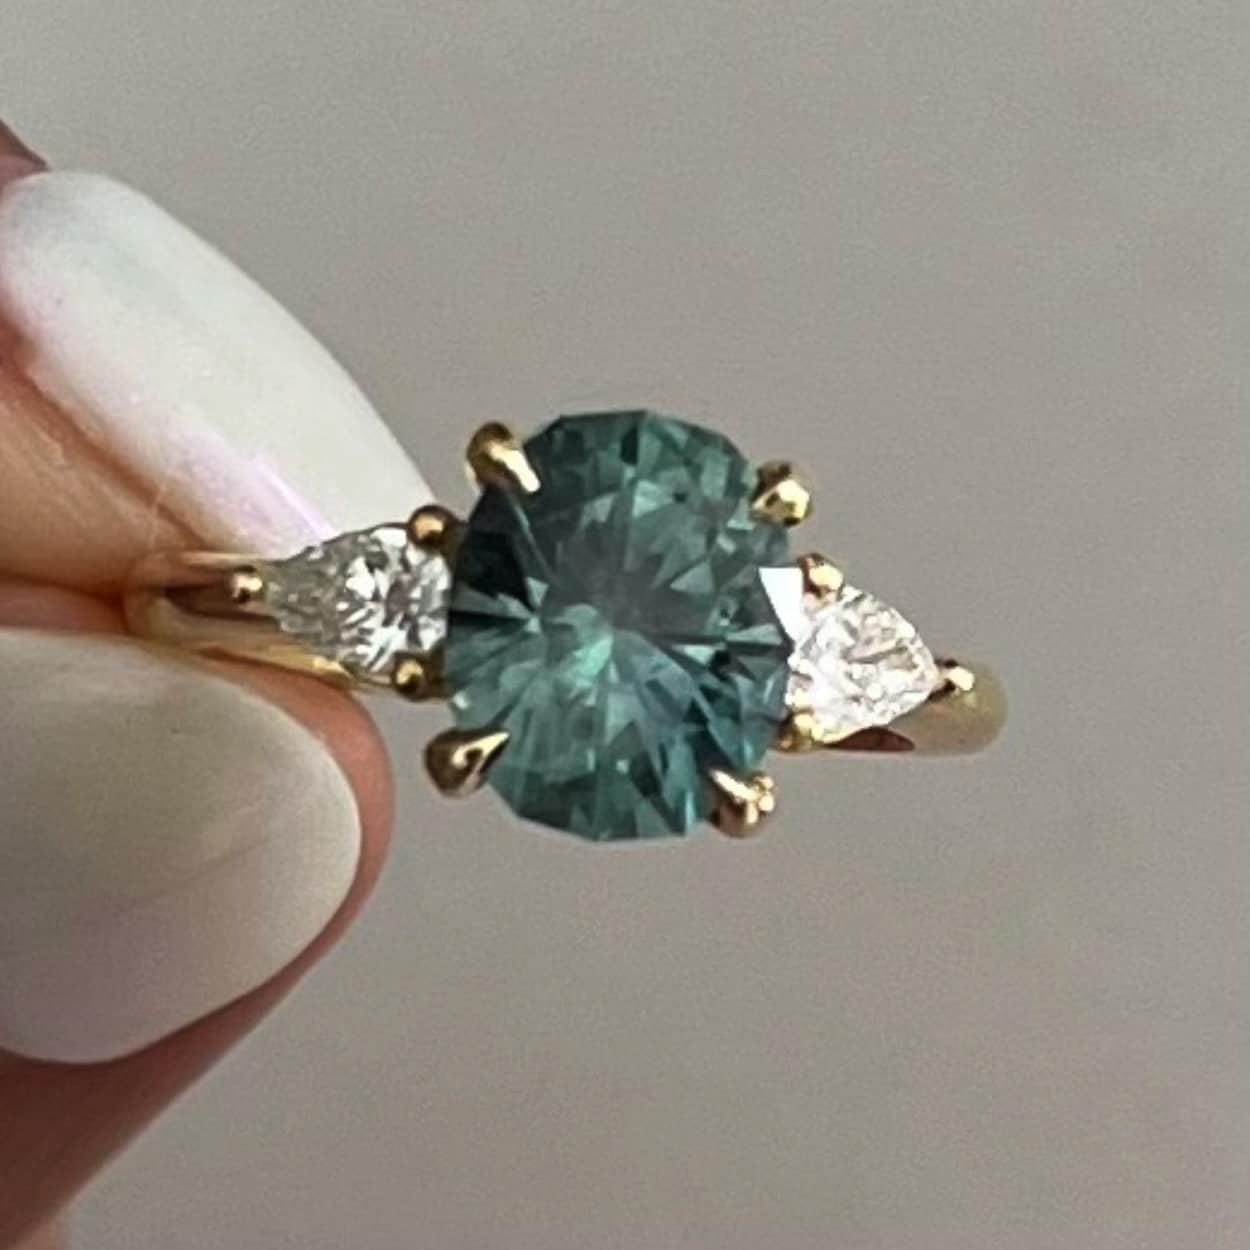 A photo from a customer review, featuring a ring not made by Earth's Treasury including a 2.30-Carat Spruce Green Montana Sapphire